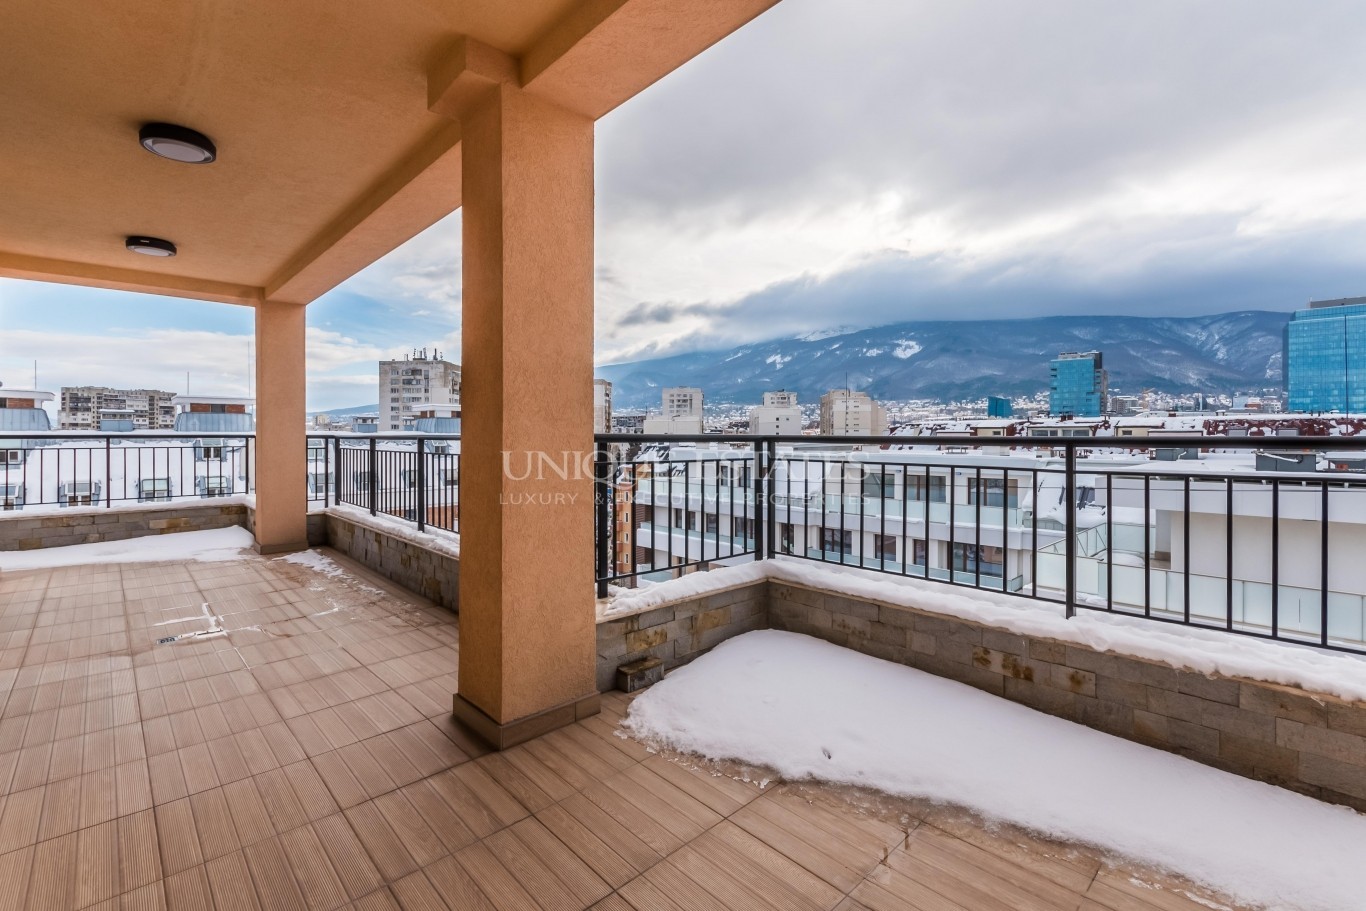 Penthouse for sale in Sofia, Motopista with listing ID: K8037 - image 17